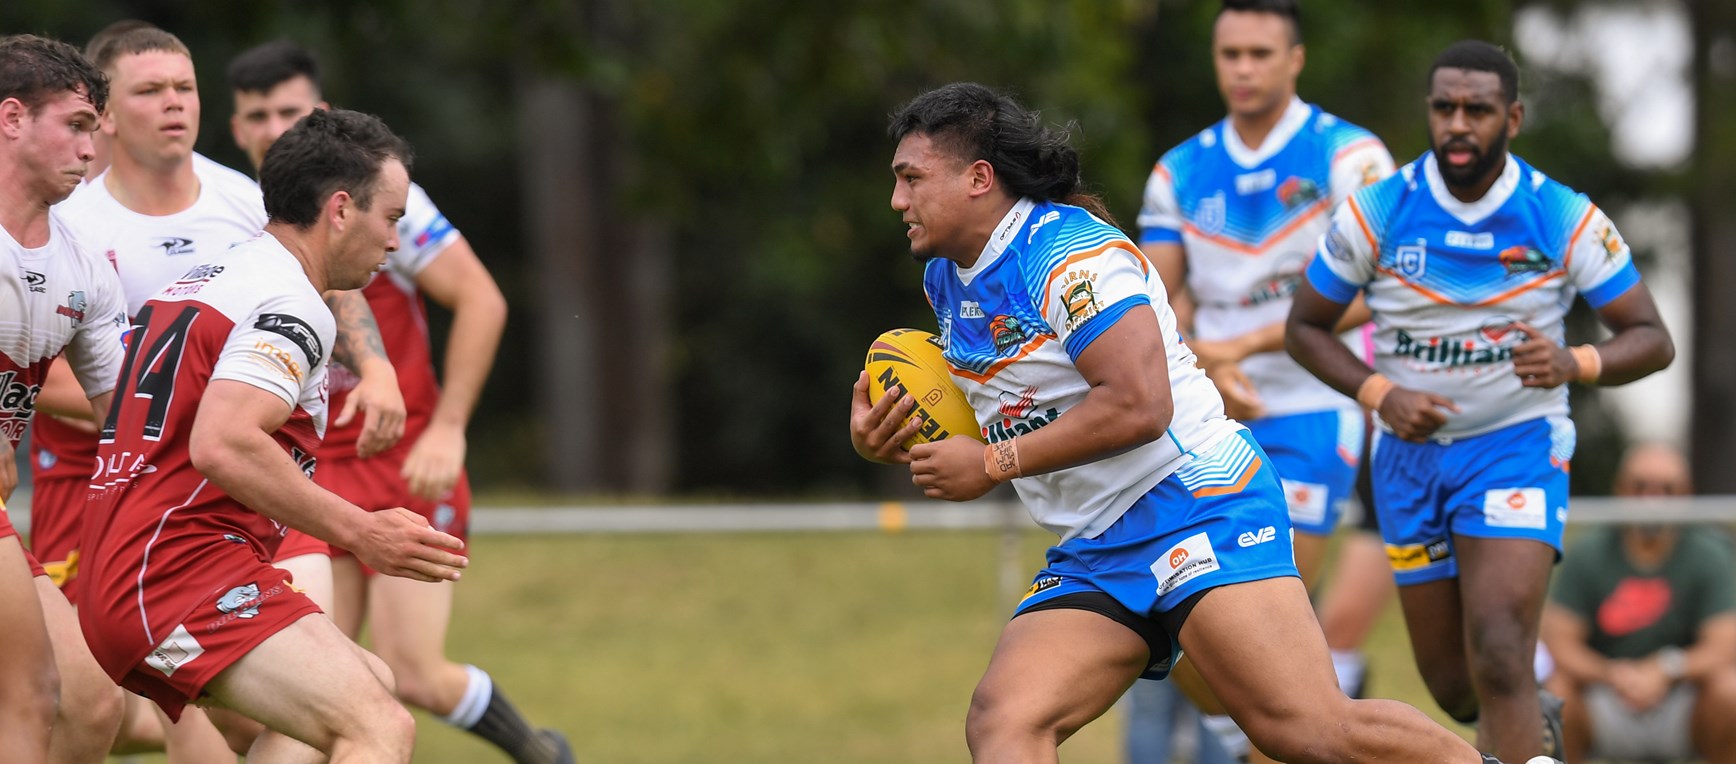 In pictures: Hastings Deering Colts Round 13